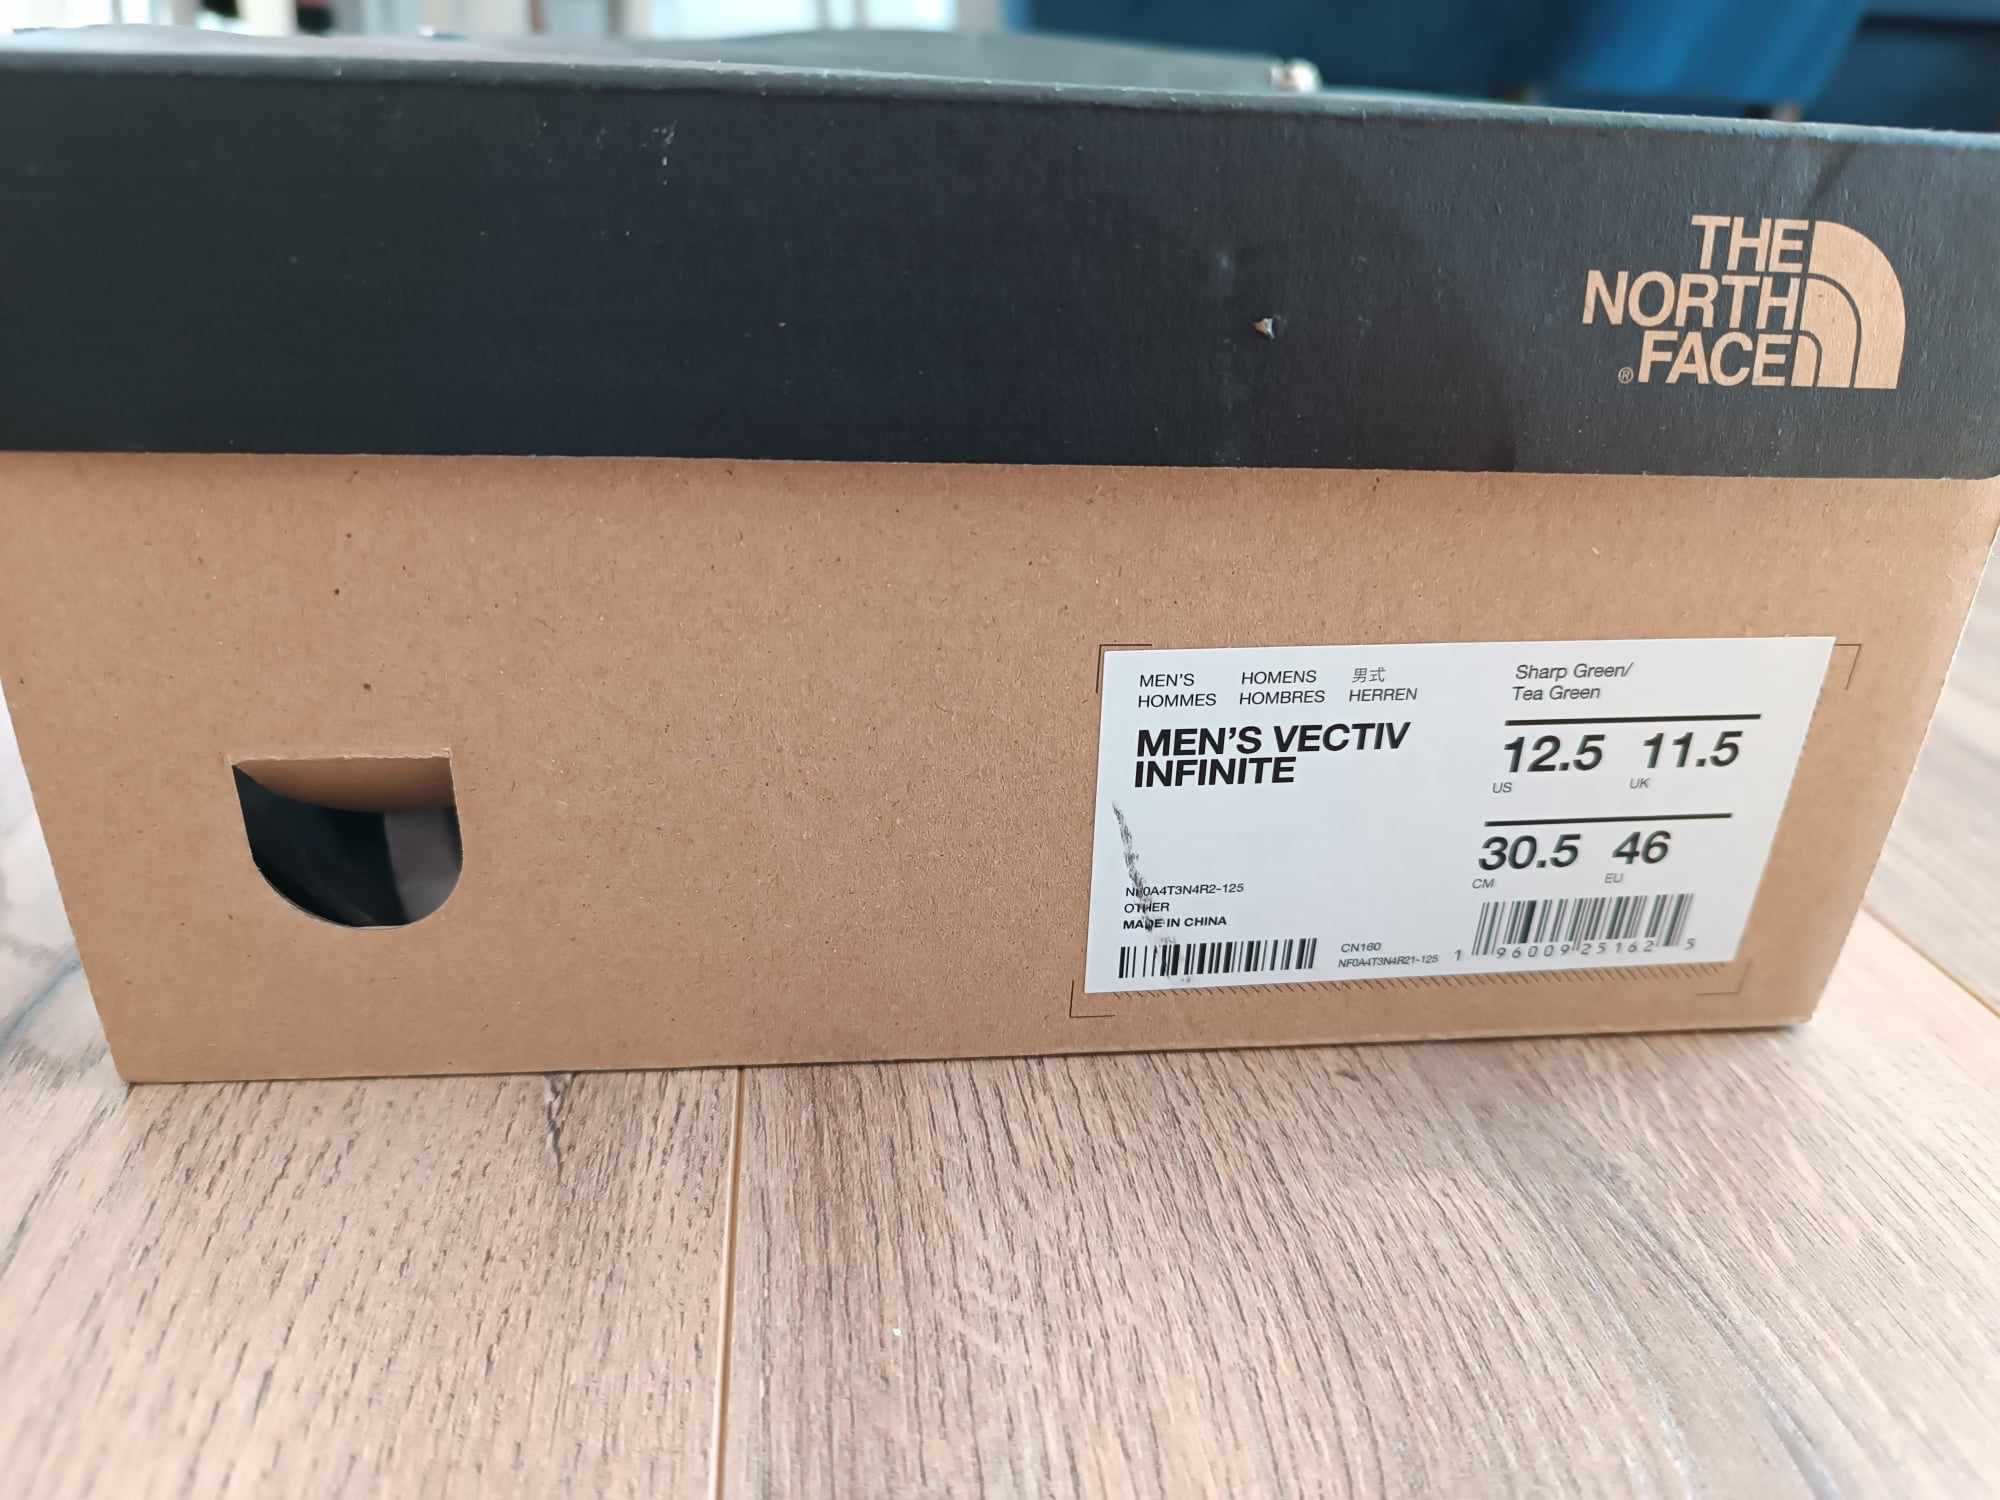 Buty The North Face R:46-30,5cm